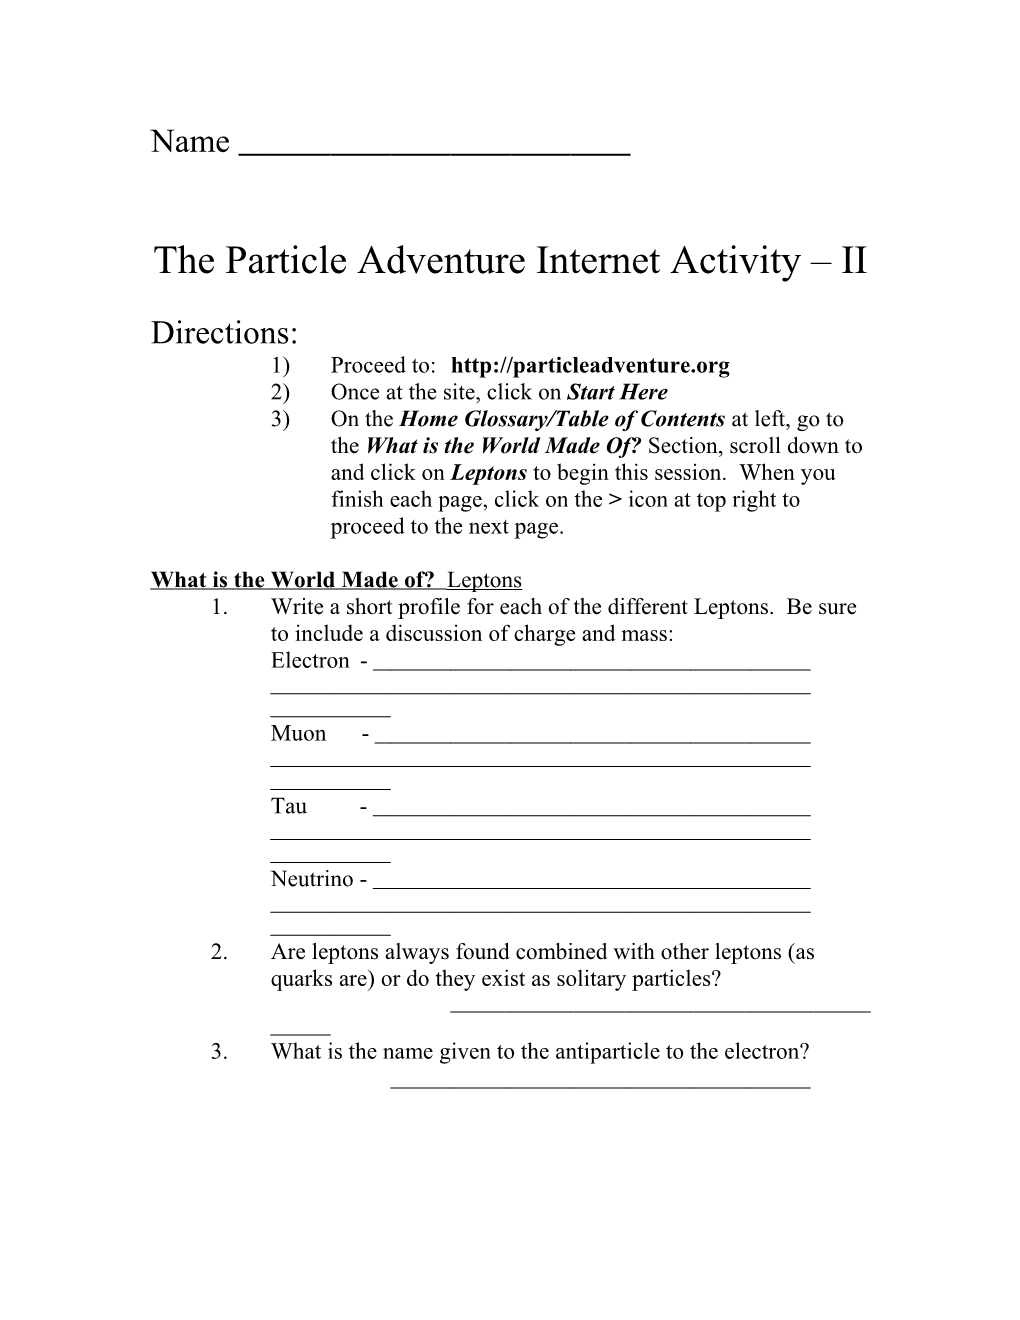 The Particle Adventure Internet Activity II